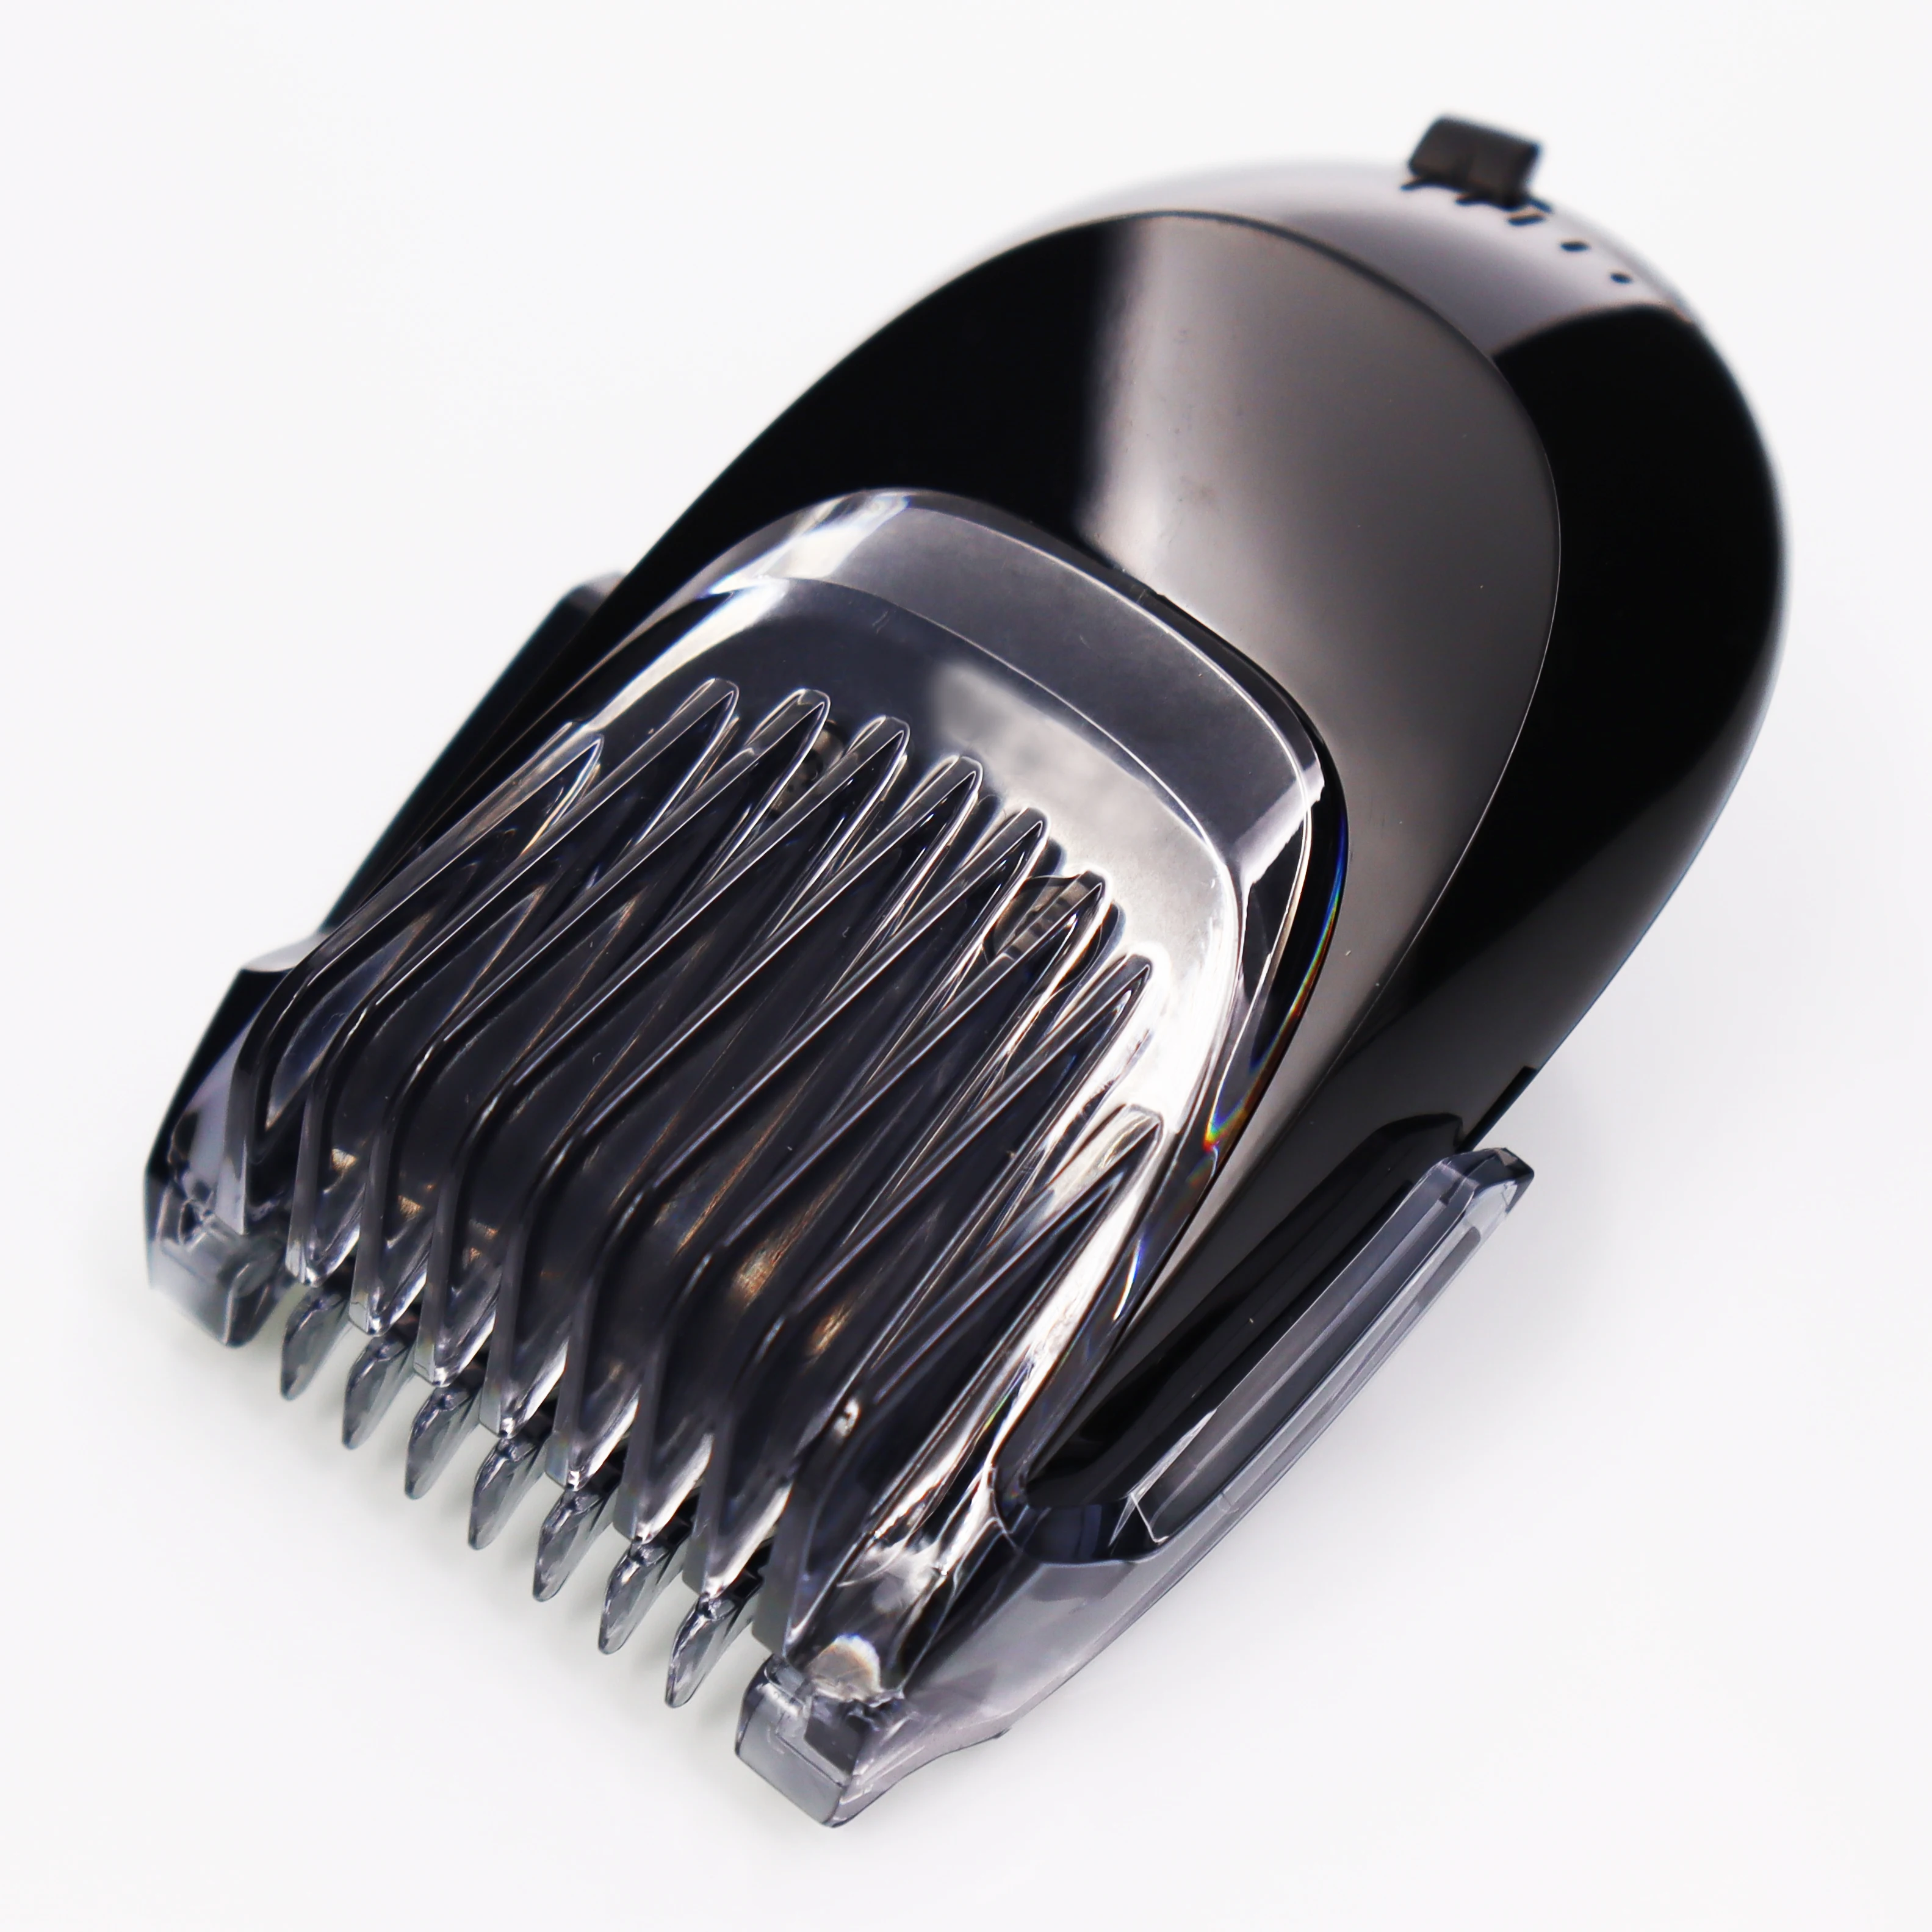 Philips Beard Trimmer Accessory - Shaver Trimmer Head Blade Comb Philips Rq111 Aliexpress